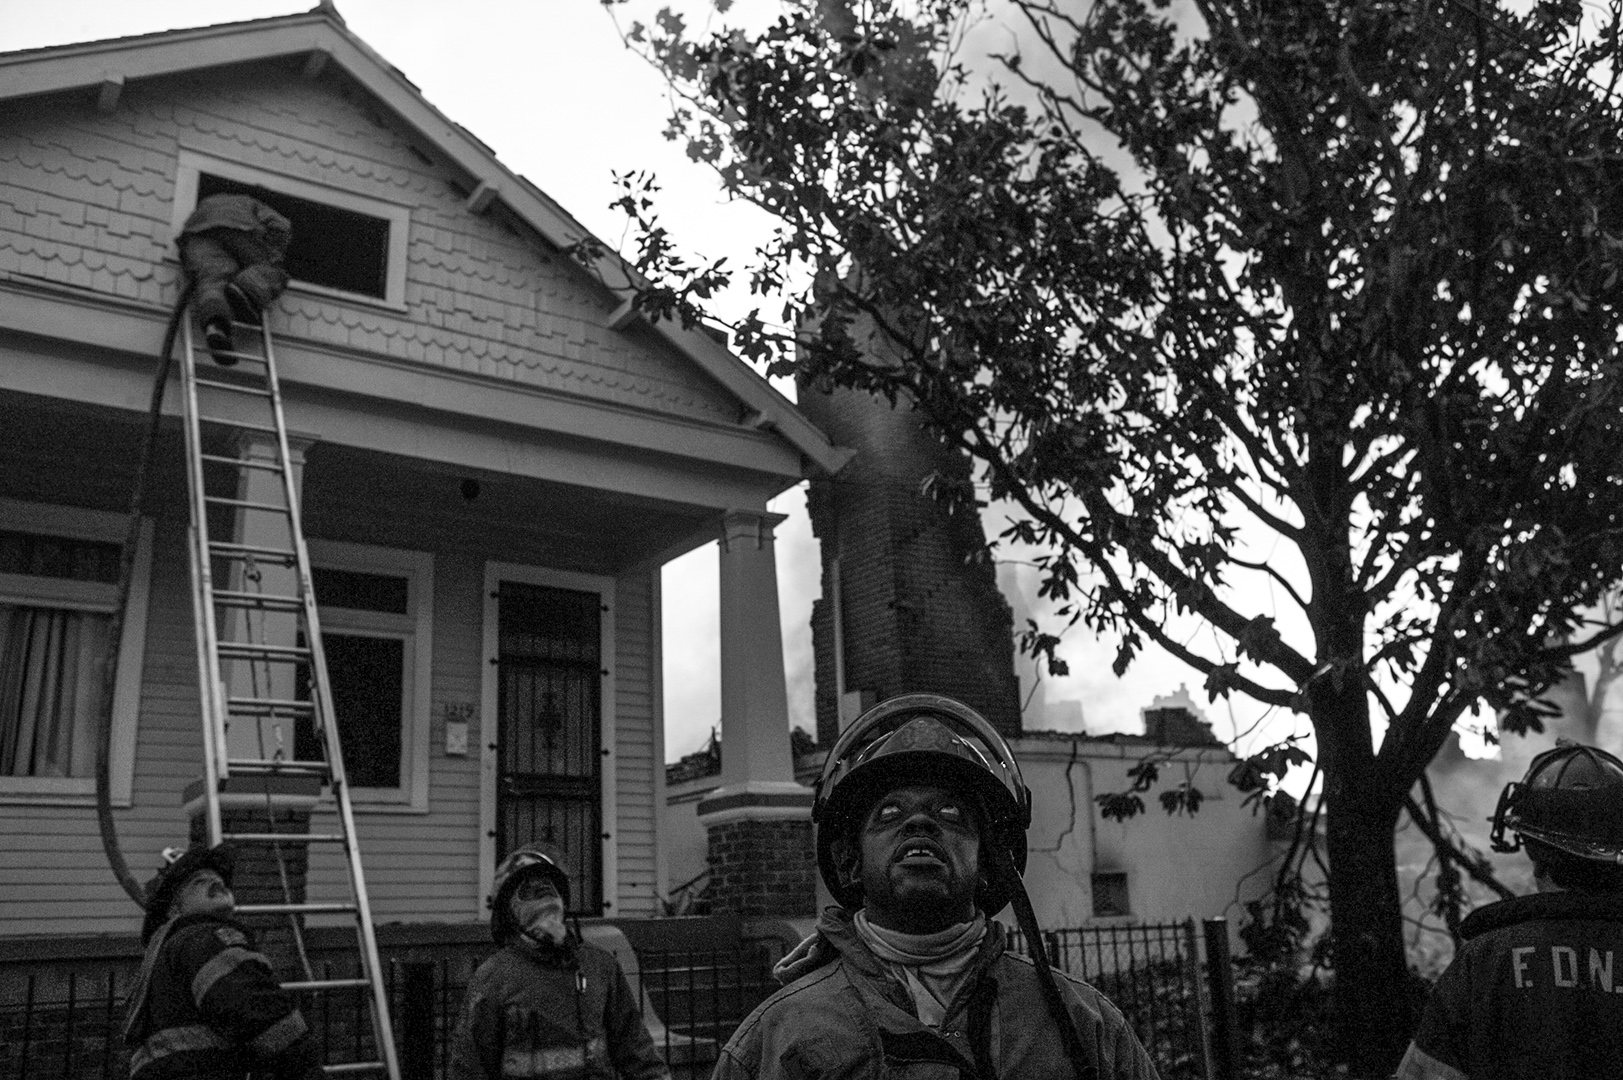  Firefighters at the scene of a house fire. 